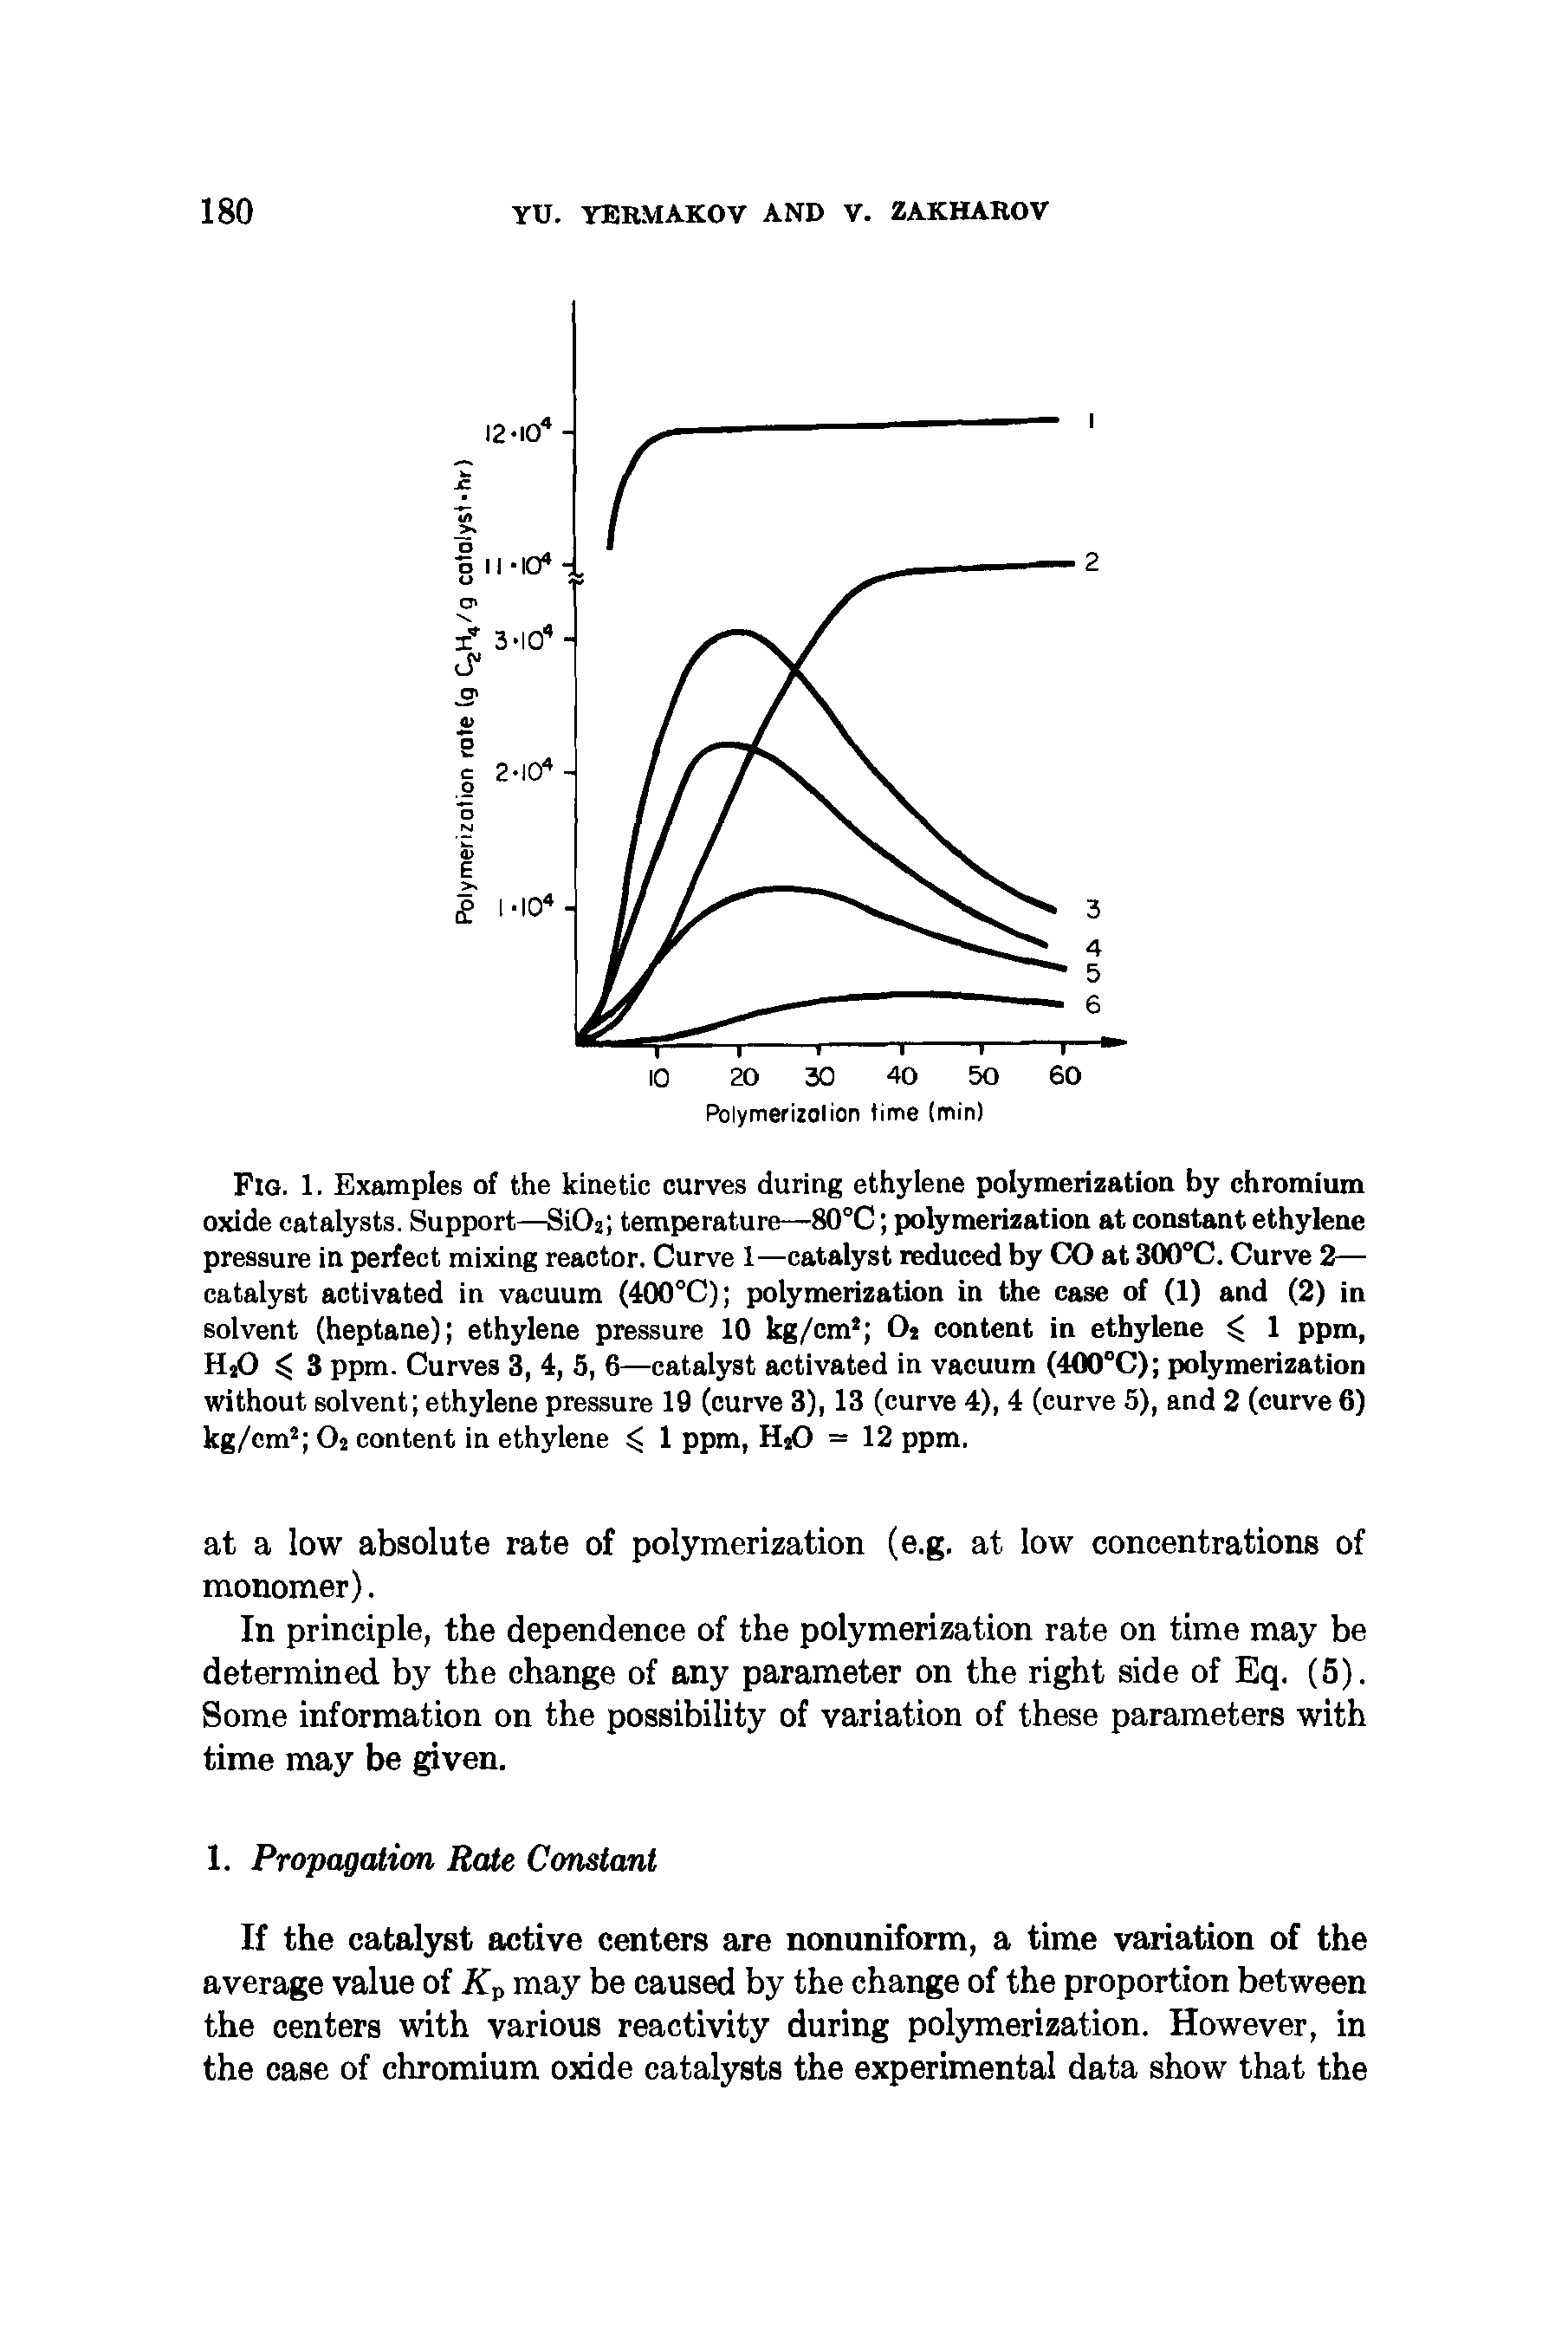 Fig. 1. Examples of the kinetic curves during ethylene polymerization by chromium oxide catalysts. Support—SiOs temperature—80°C polymerization at constant ethylene pressure in perfect mixing reactor. Curve 1—catalyst reduced by CO at 300°C. Curve 2— catalyst activated in vacuum (400°C) polymerization in the case of (1) and (2) in solvent (heptane) ethylene pressure 10 kg/cm2 02 content in ethylene 1 ppm, HsO 3 ppm. Curves 3, 4, 5, 6—catalyst activated in vacuum (400°C) polymerization without solvent ethylene pressure 19 (curve 3), 13 (curve 4), 4 (curve 5), and 2 (curve 6) kg/cm2 02 content in ethylene 1 ppm, HsO = 12 ppm.